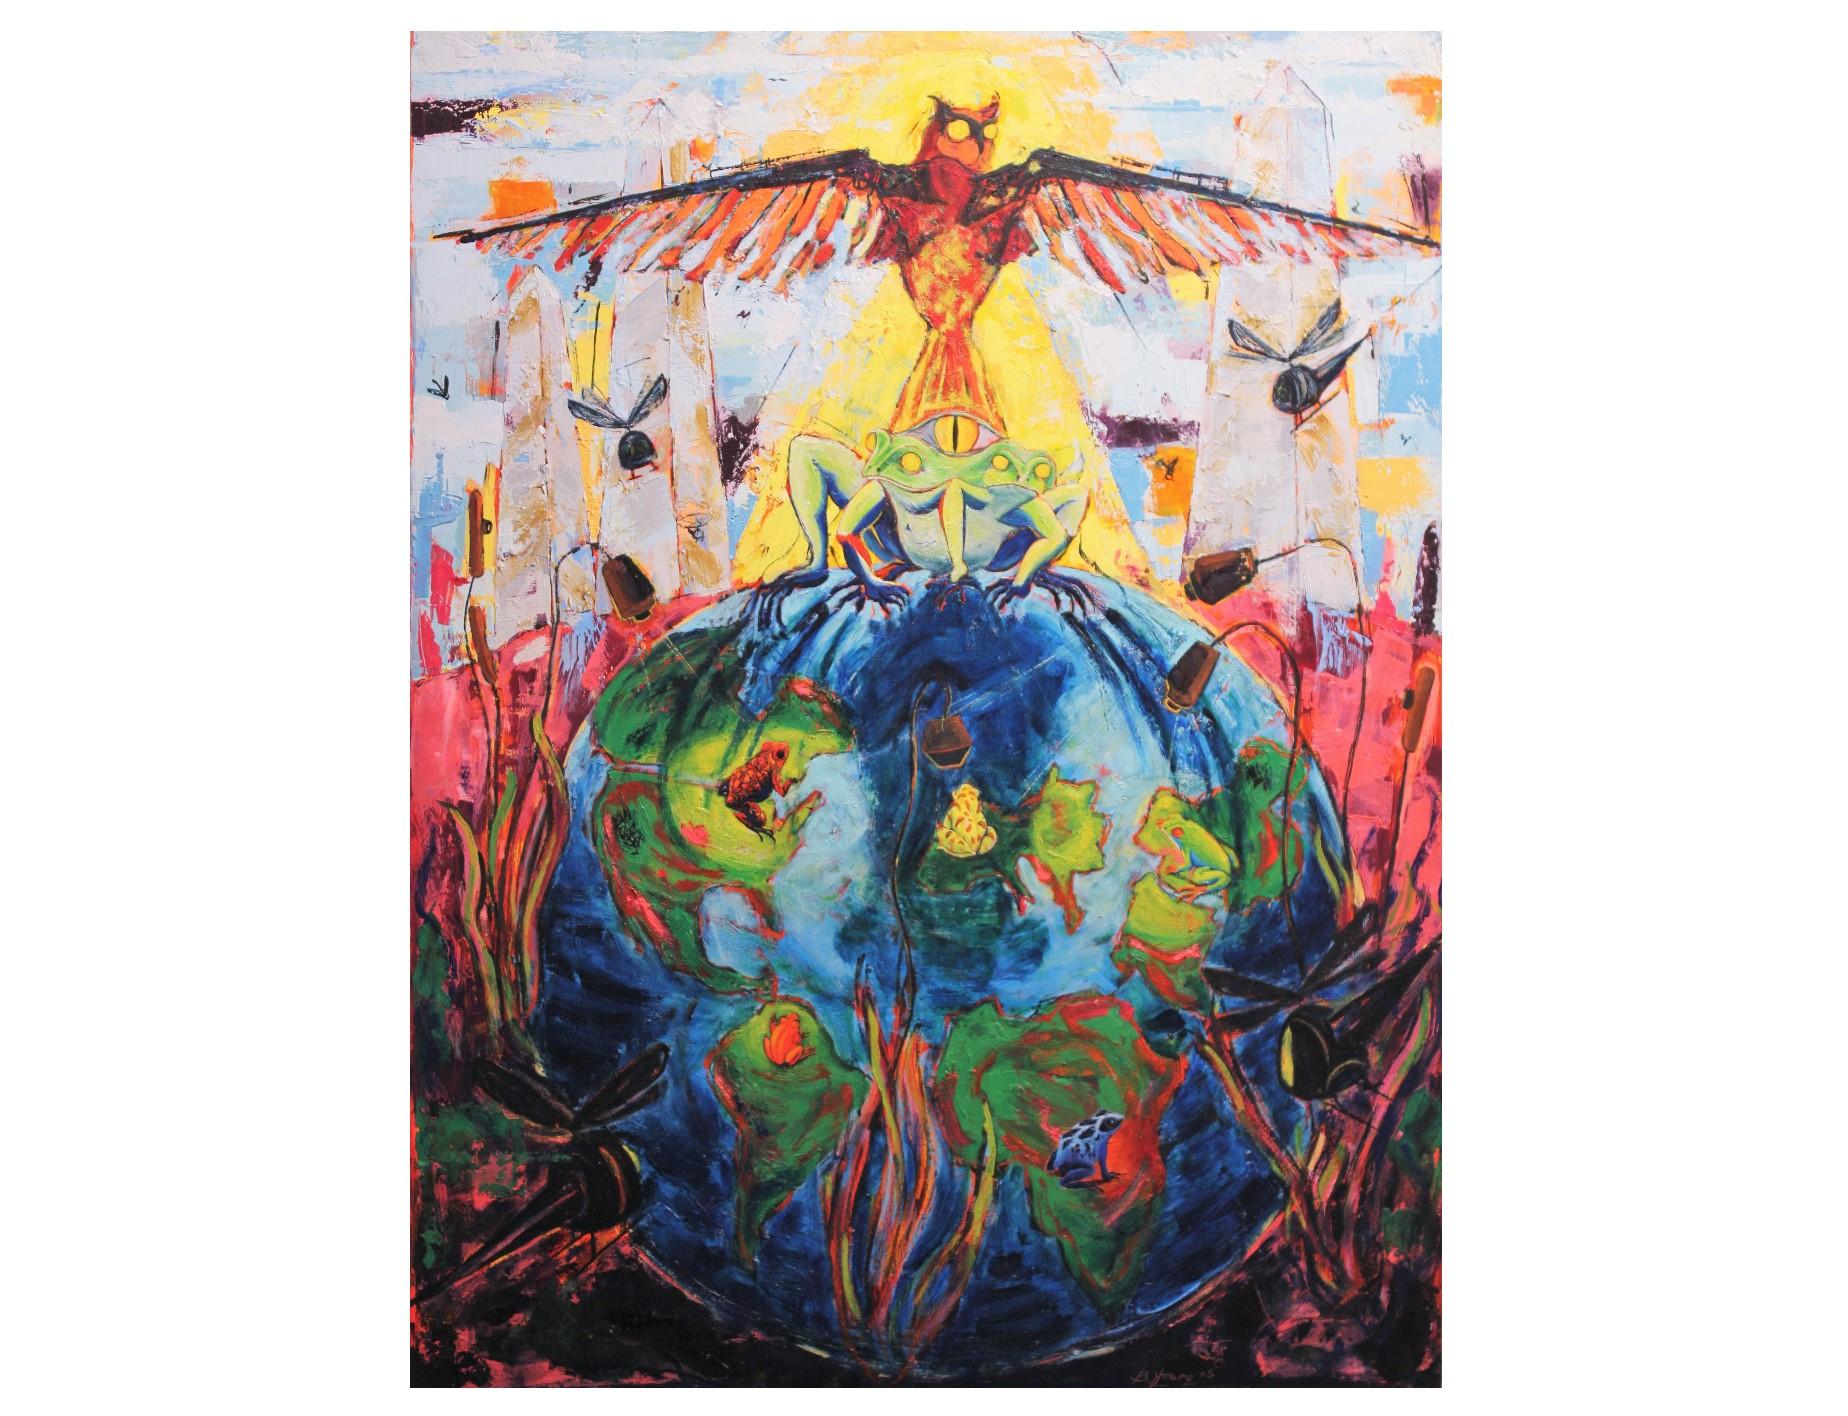 Bonnie Young Abstract Painting - "One World Pond" Surrealist Animal World Painting